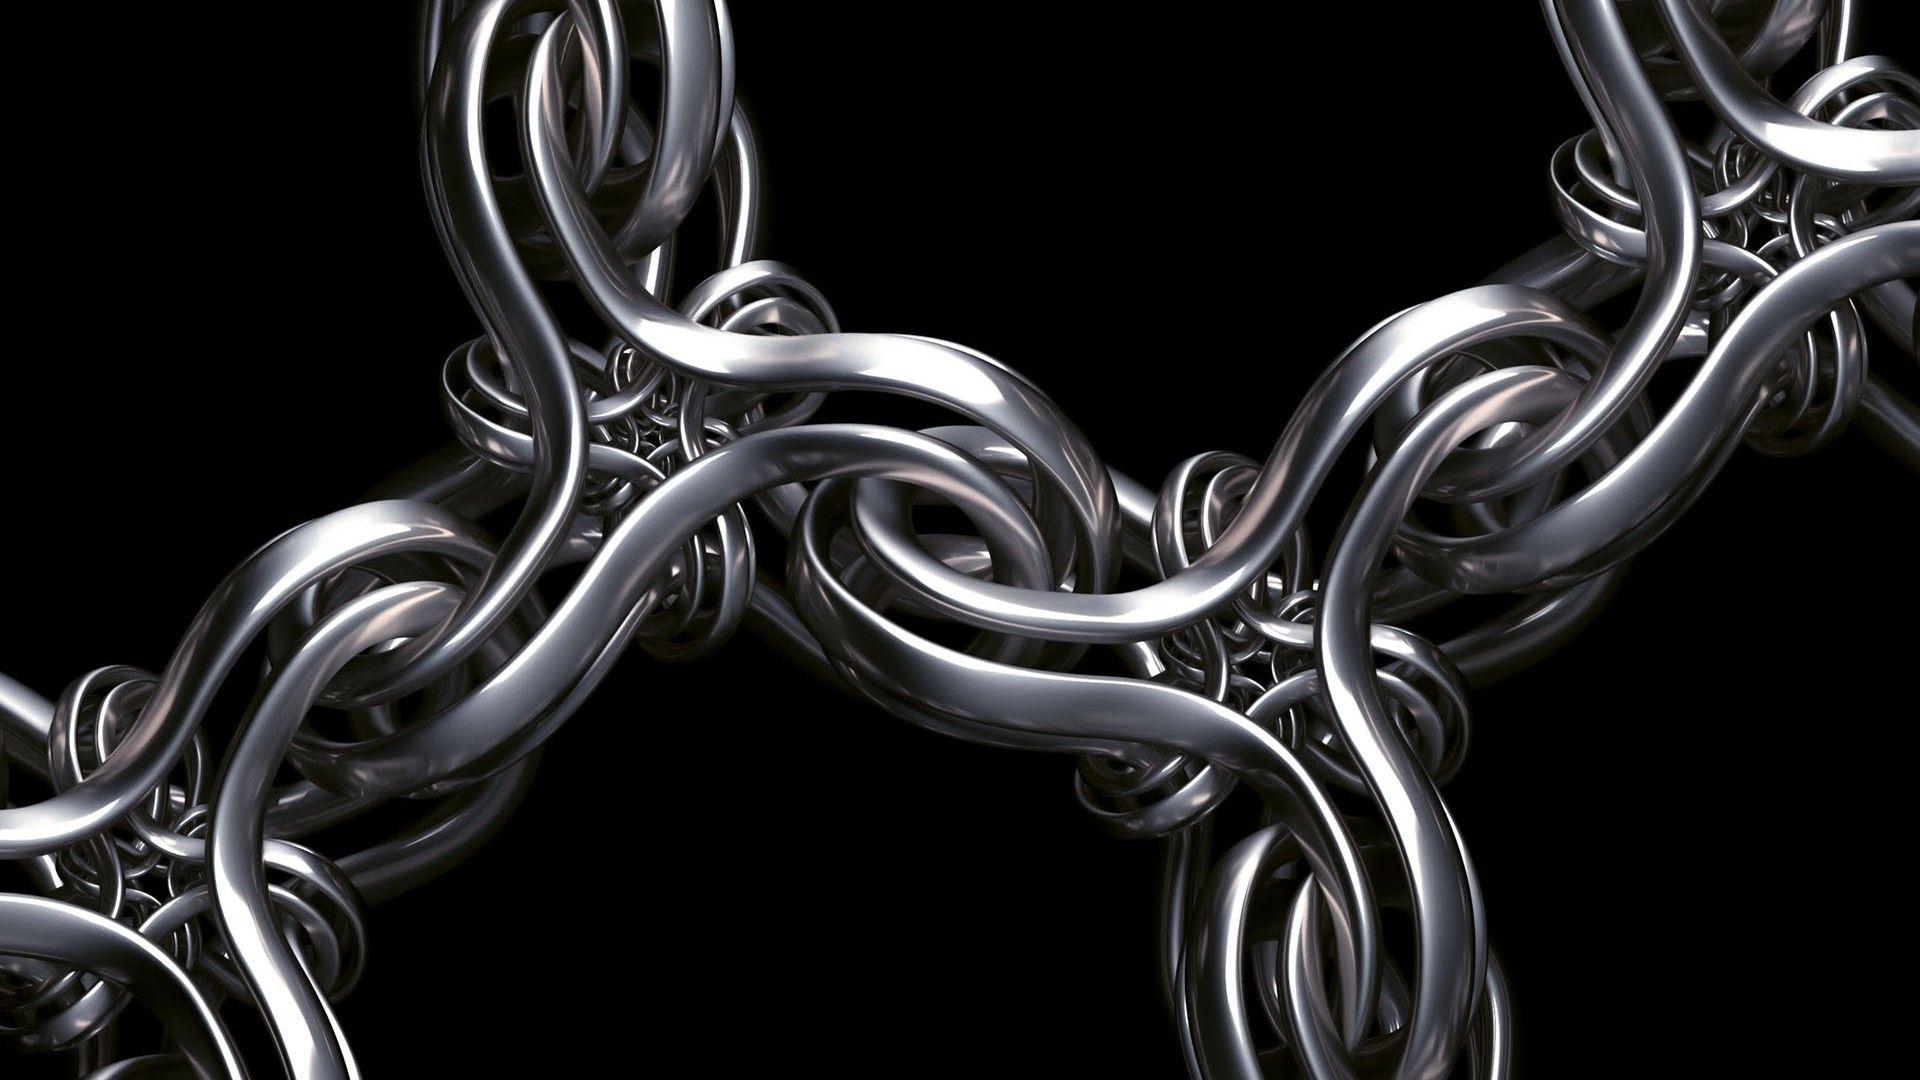 Wallpaper, abstract, metal, silver, chain, 1920x1080 px